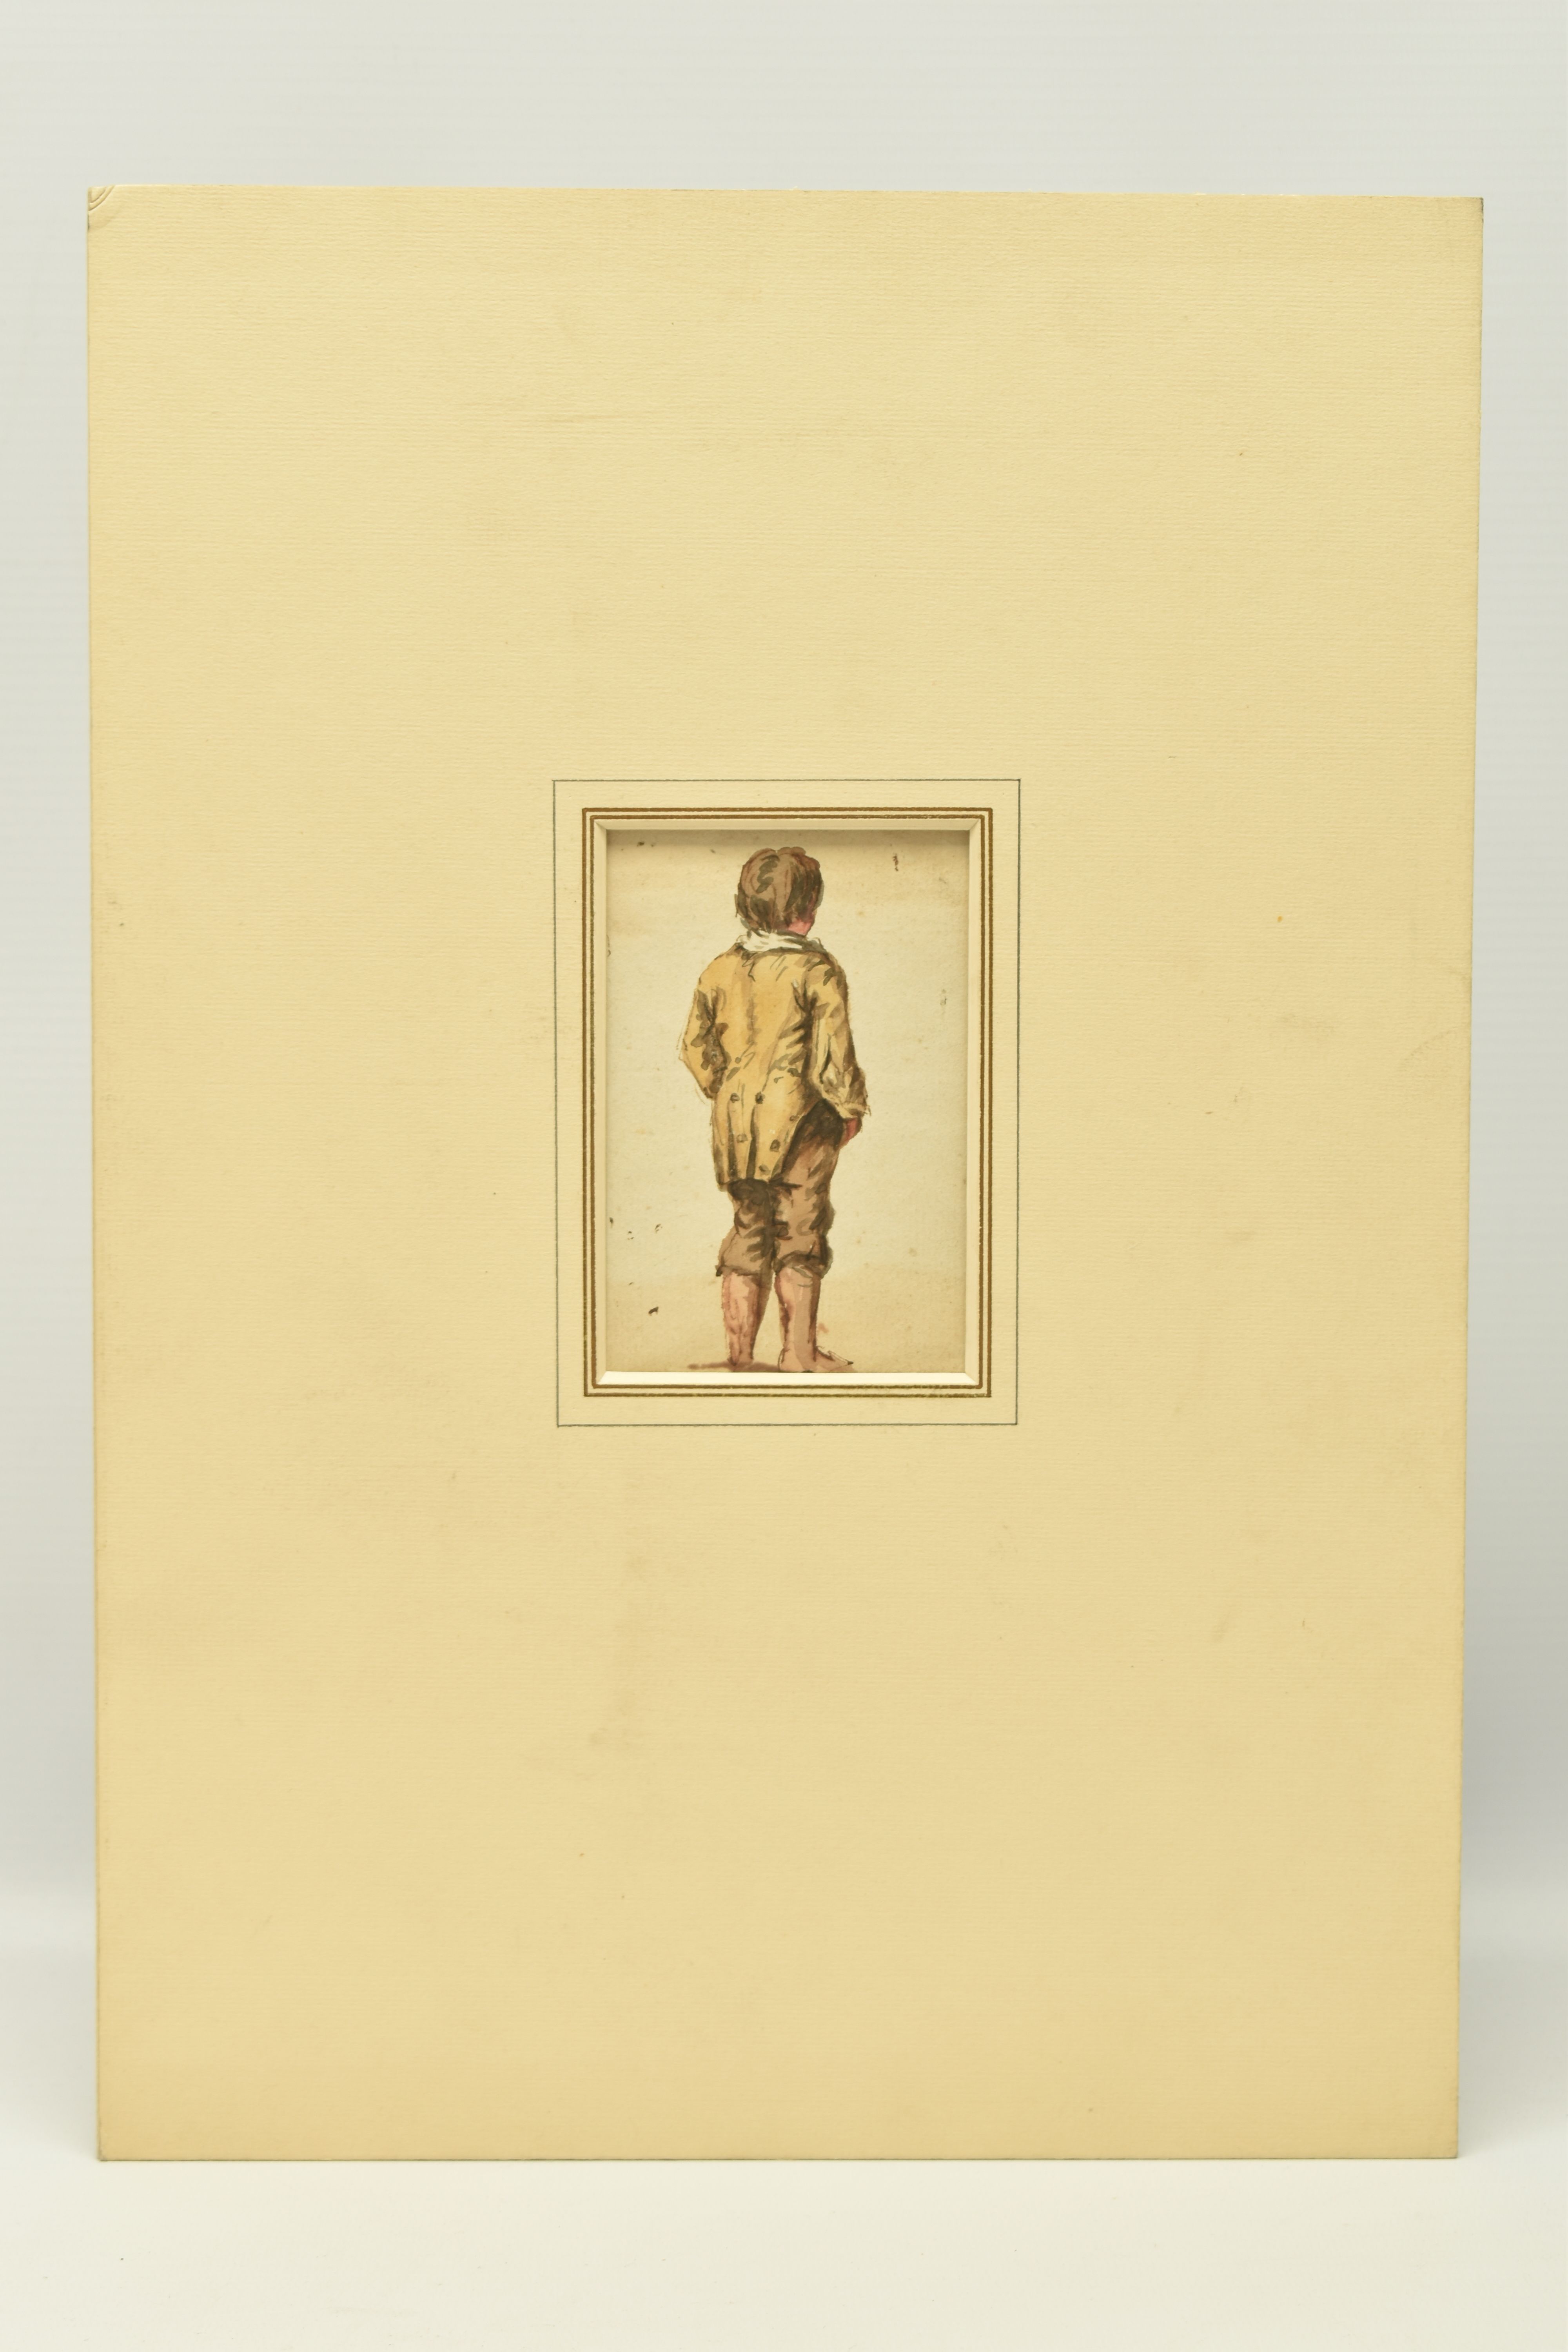 CIRCLE OF PHILIP JAKOB De LOUTHERBOURG (1740-1812) A STUDY OF A YOUNG BOY, the boy is viewed from